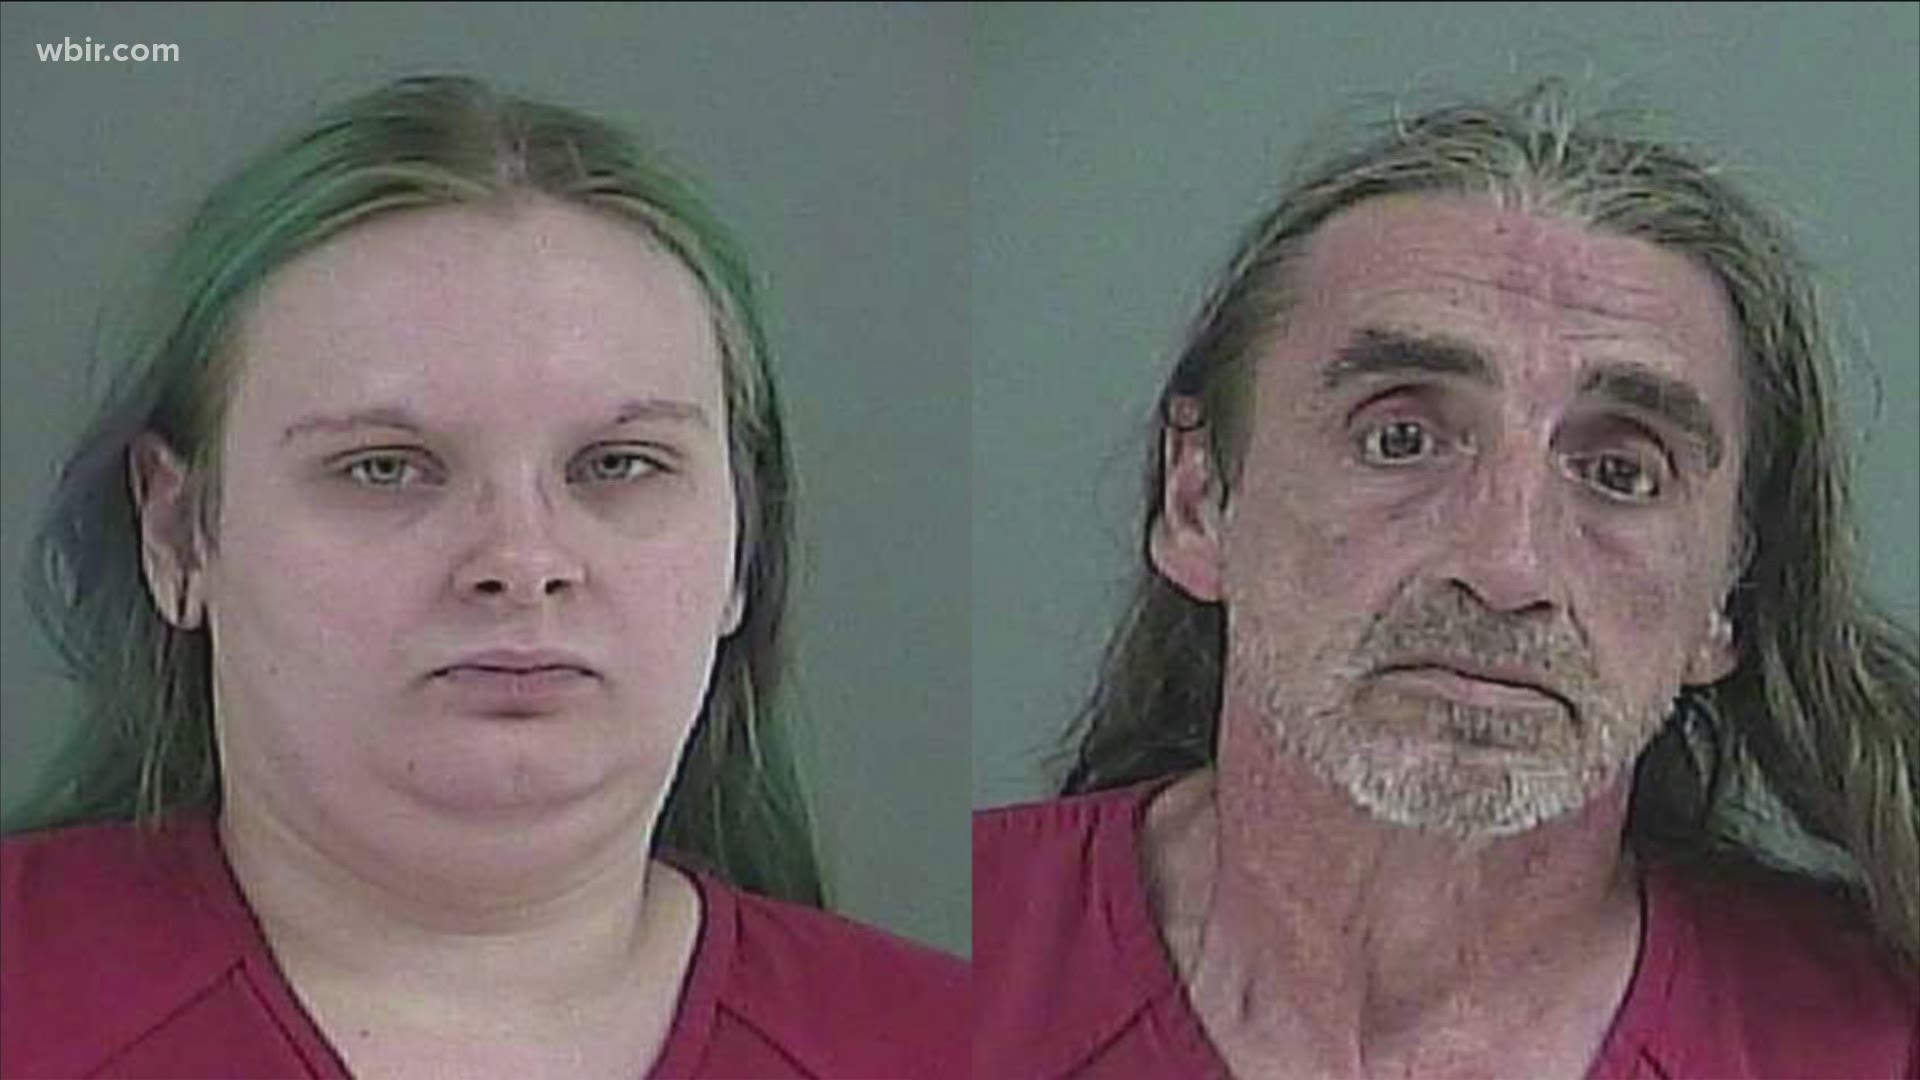 A grand jury will consider murder charges against an Oak Ridge couple who police say tortured and beat a woman they lured into their home.